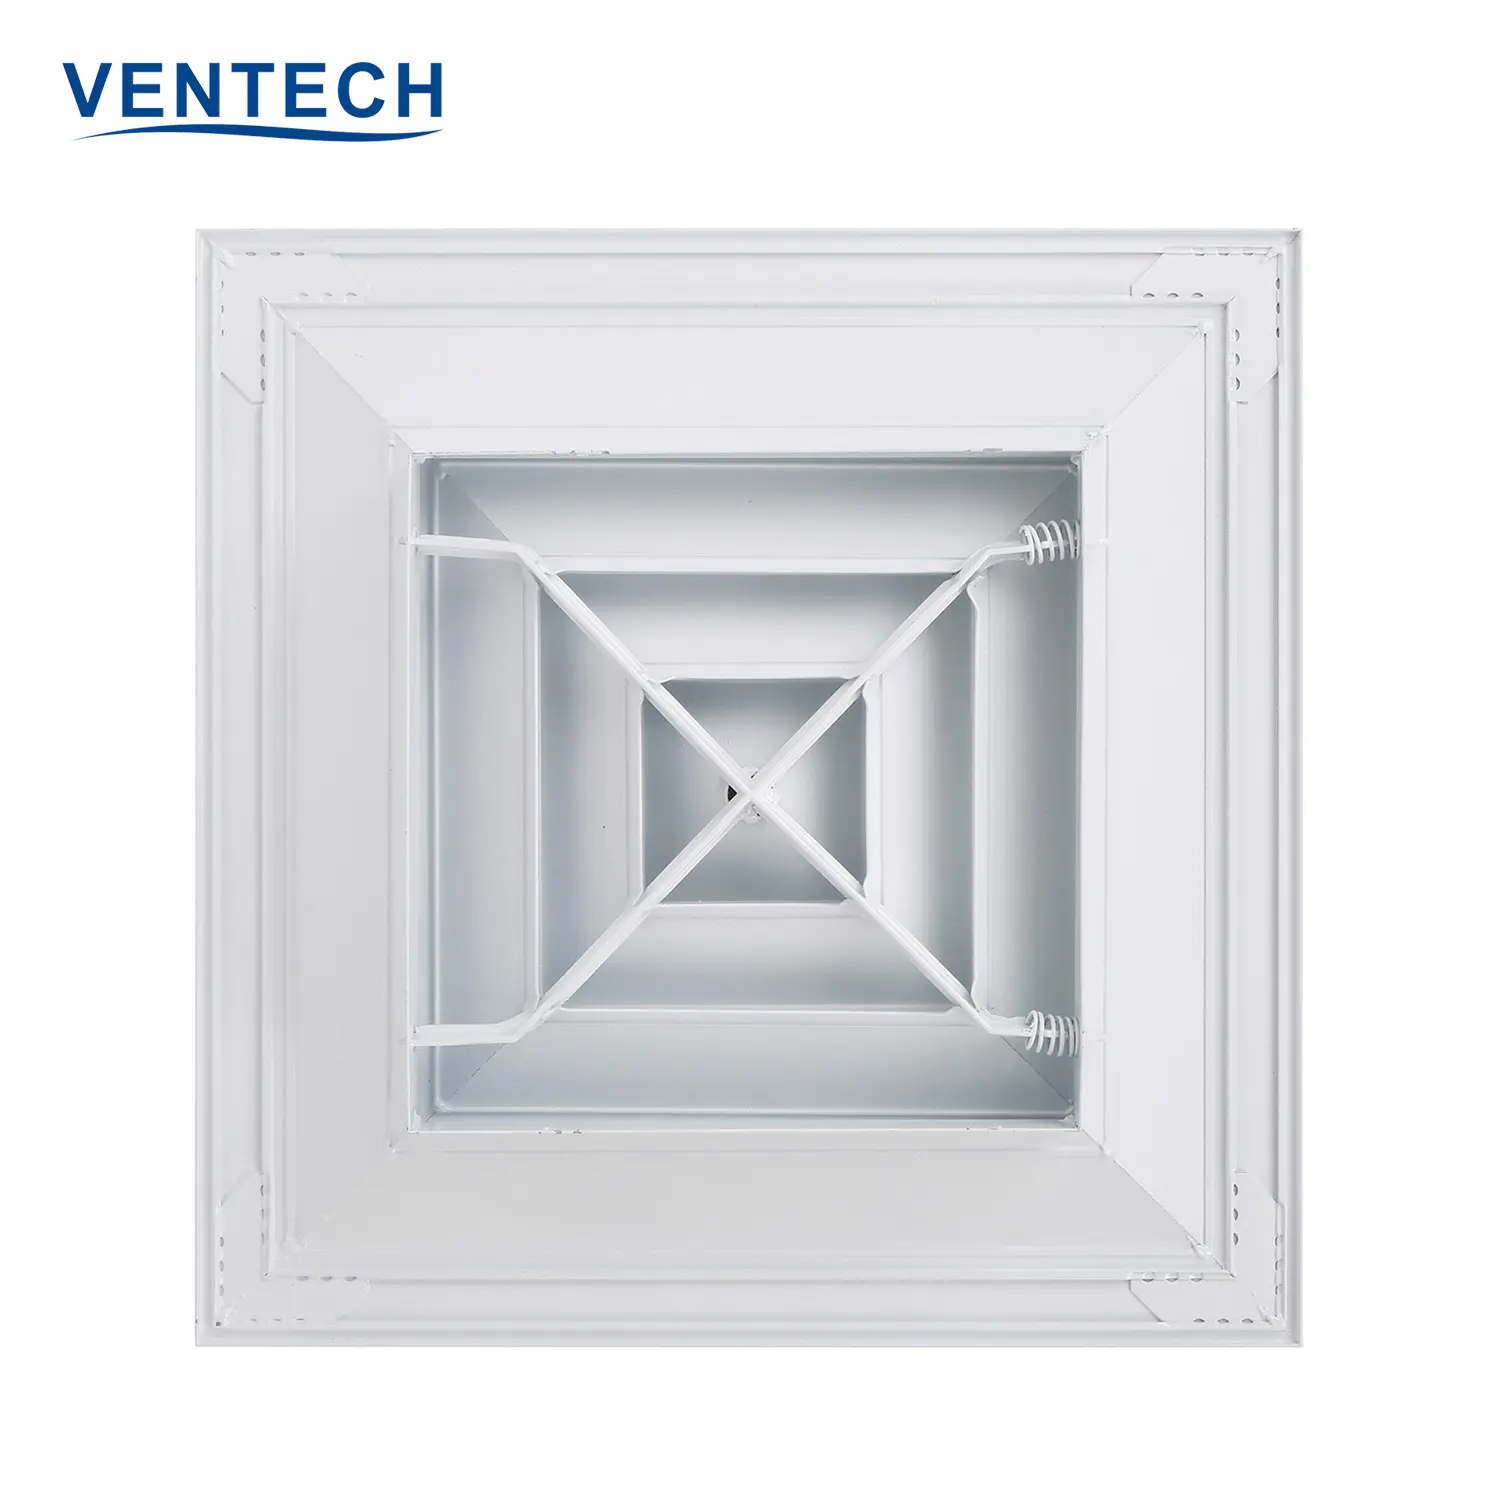 Hvac High Quality Havc Exhaust Air Conditioning Aluminum Square Ceiling Air Diffusers For Ventilation